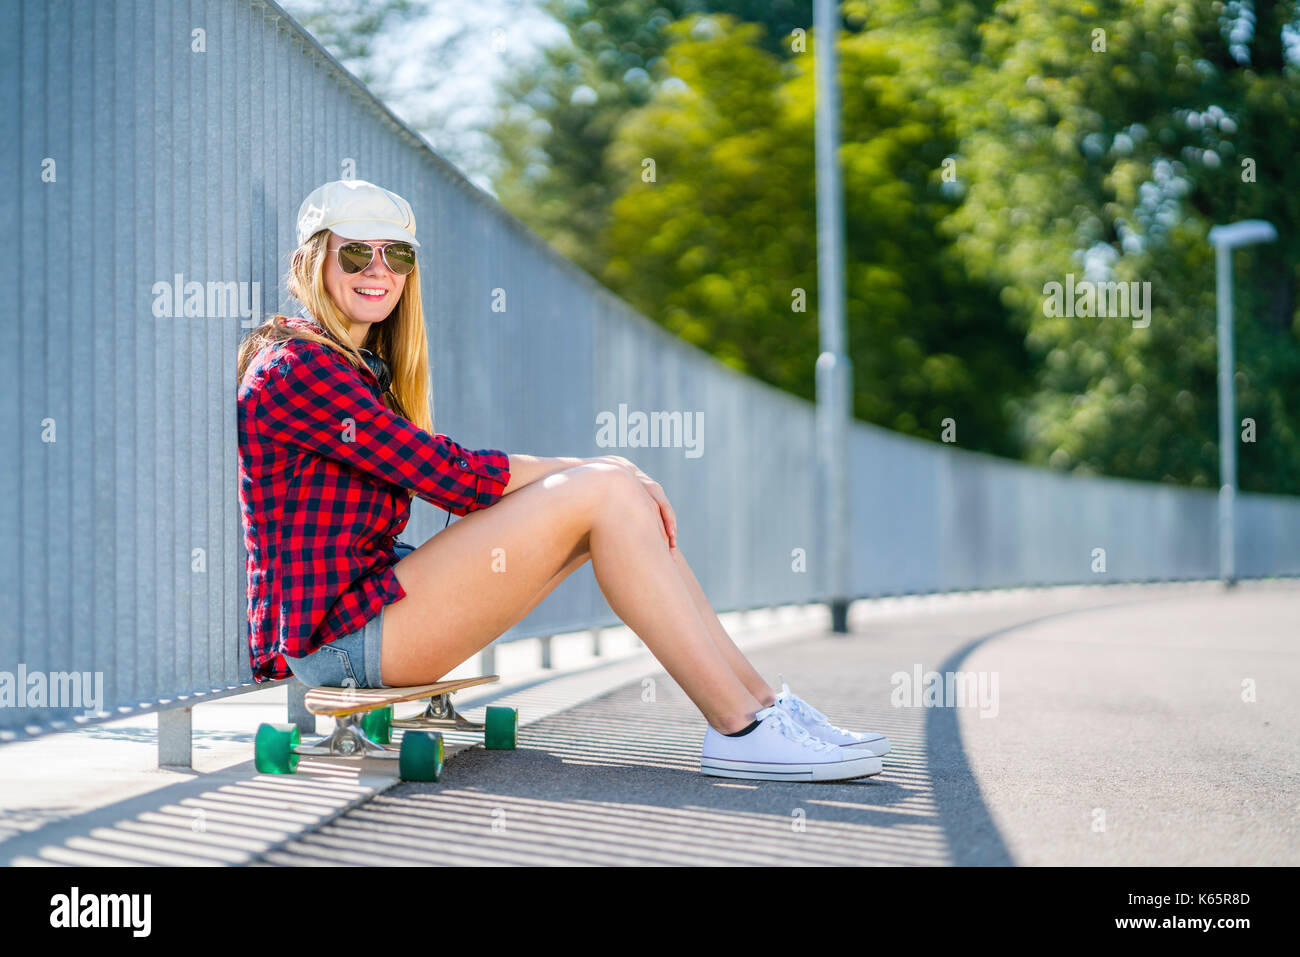 Woman, 22 years old, sits on longboard, leans on street railings and relaxes Stock Photo